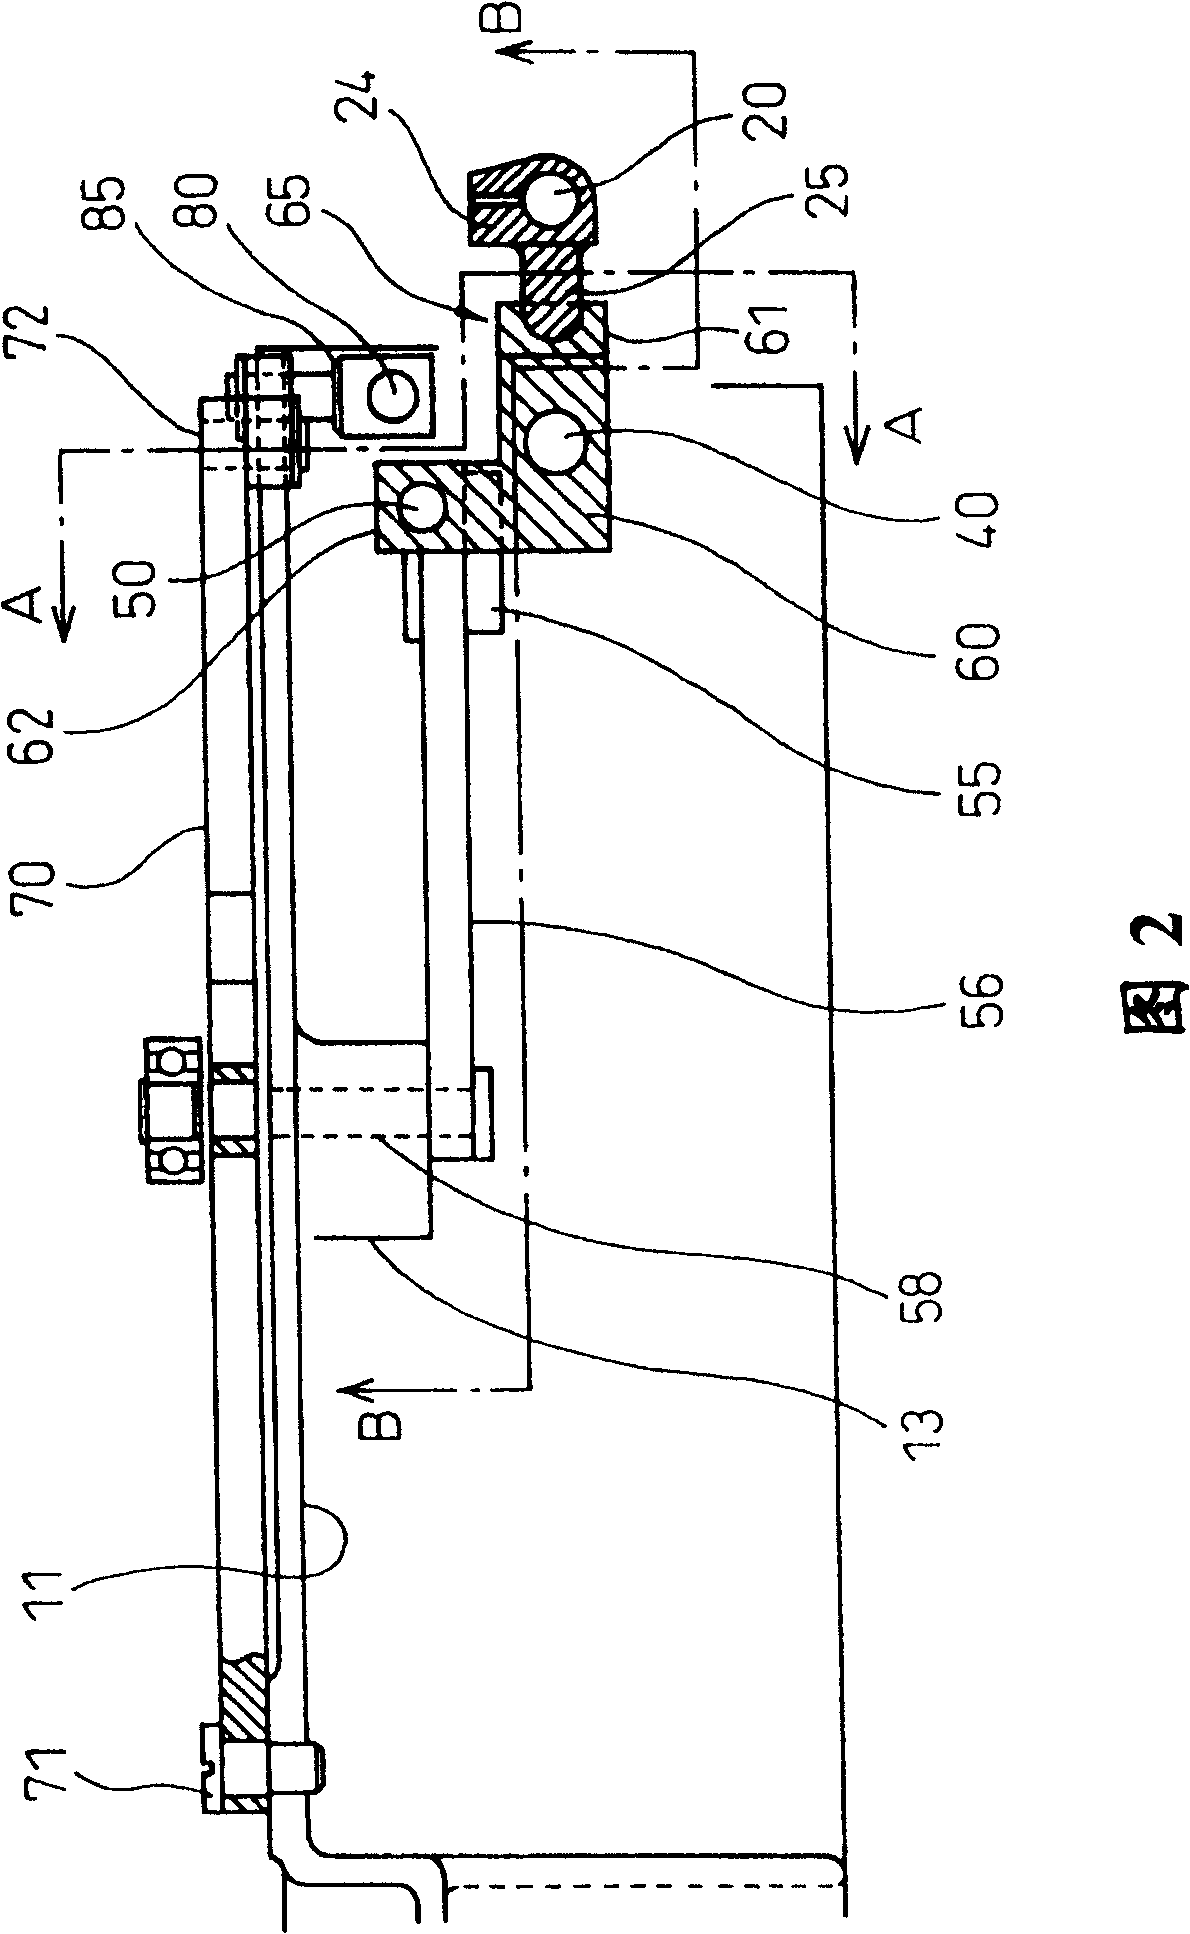 Jump sewing mechanism for sewing machine